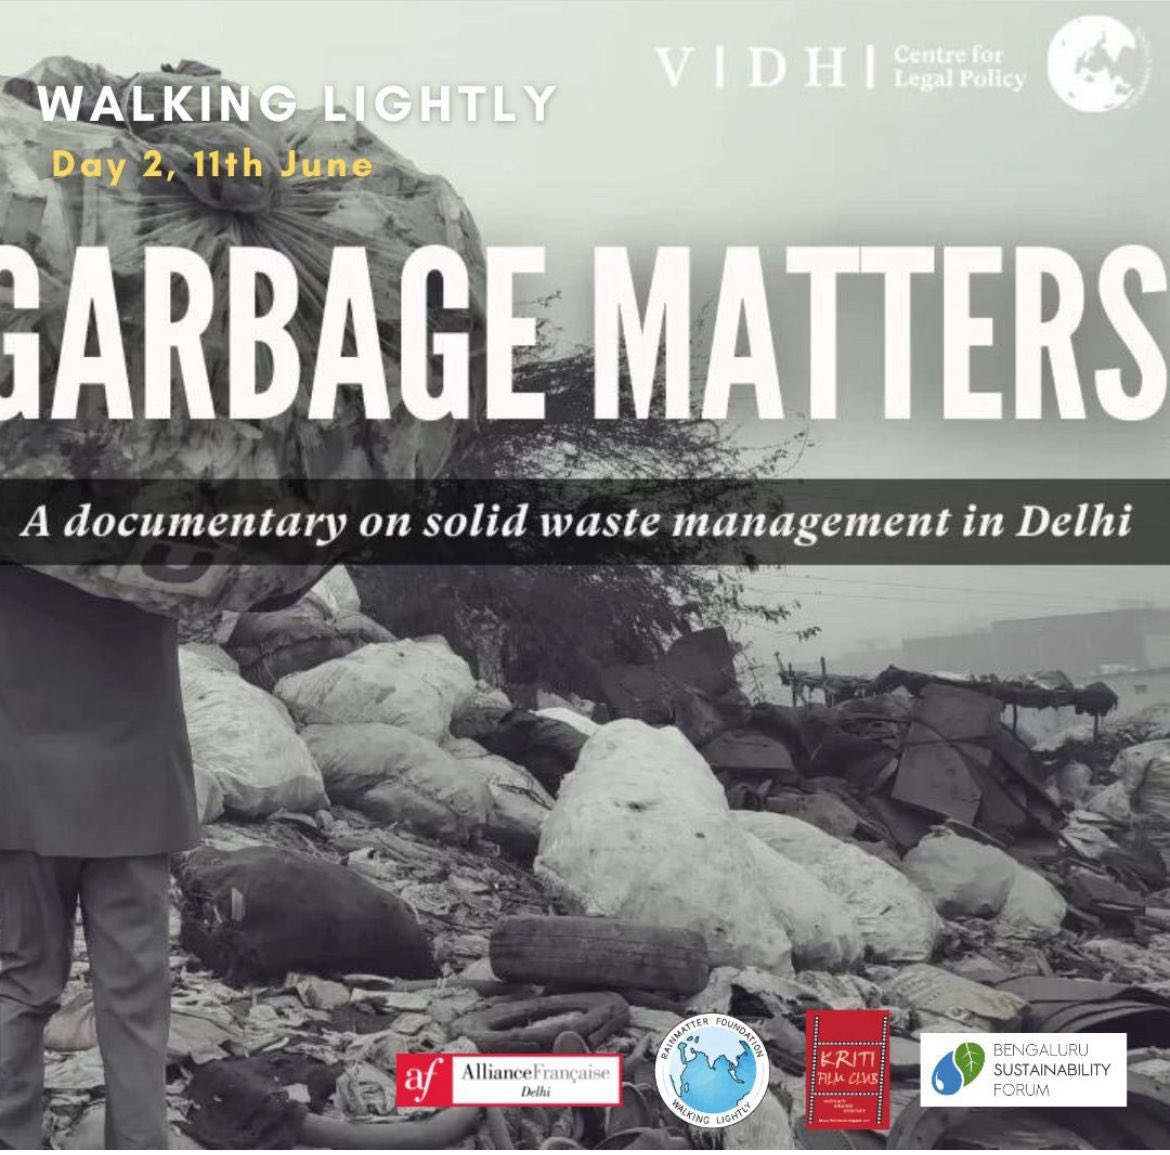 Good morning Delhi! Come spend your Sunday @alliancefrdelhi watching environmental documentaries, including one about the city by @Vidhi_India #WalkingLightly